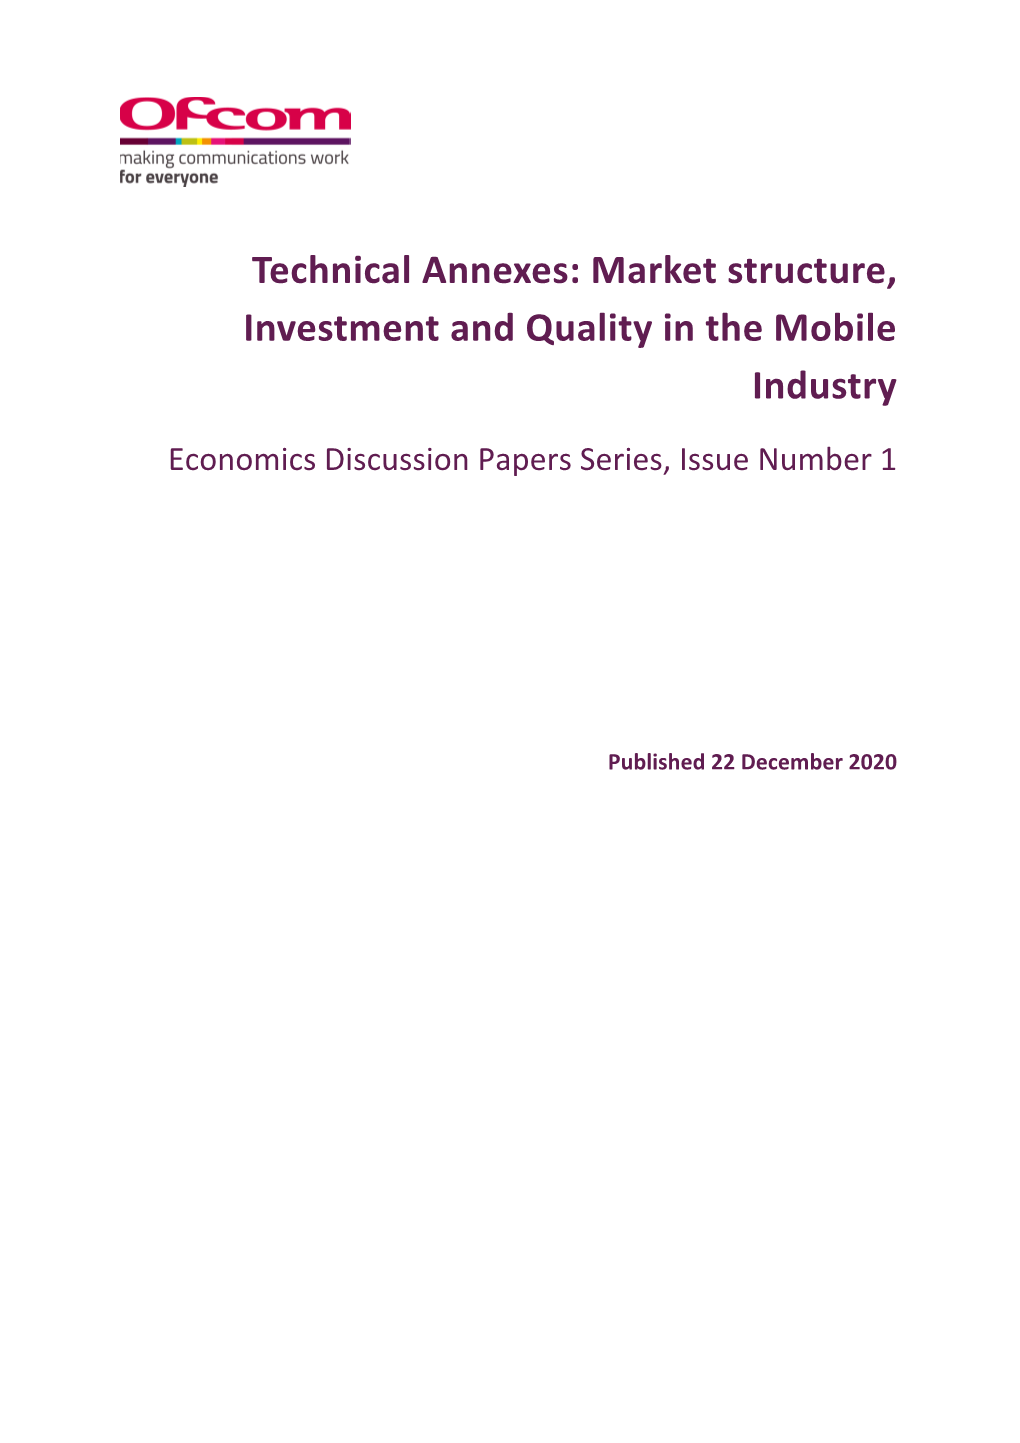 Market Structure, Investment and Quality in the Mobile Industry Economics Discussion Papers Series, Issue Number 1